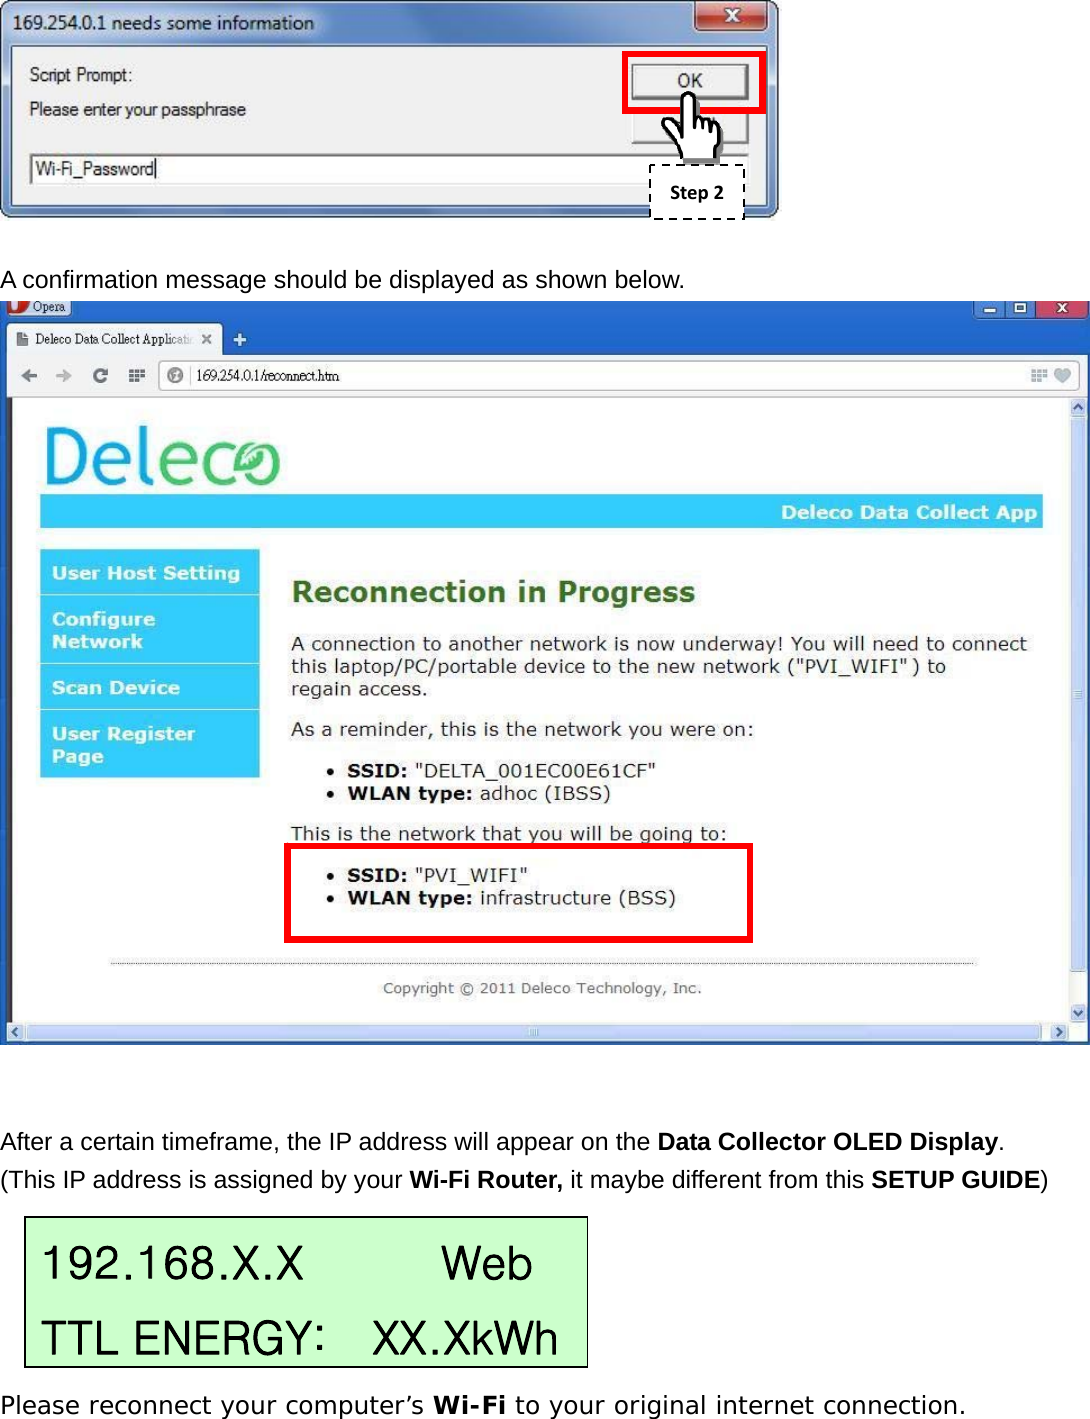   A confirmation message should be displayed as shown below.    After a certain timeframe, the IP address will appear on the Data Collector OLED Display. (This IP address is assigned by your Wi-Fi Router, it maybe different from this SETUP GUIDE)      Please reconnect your computer’s Wi-Fi to your original internet connection. 192.168.X.X      Web TTL ENERGY:    XX.XkWhStep2